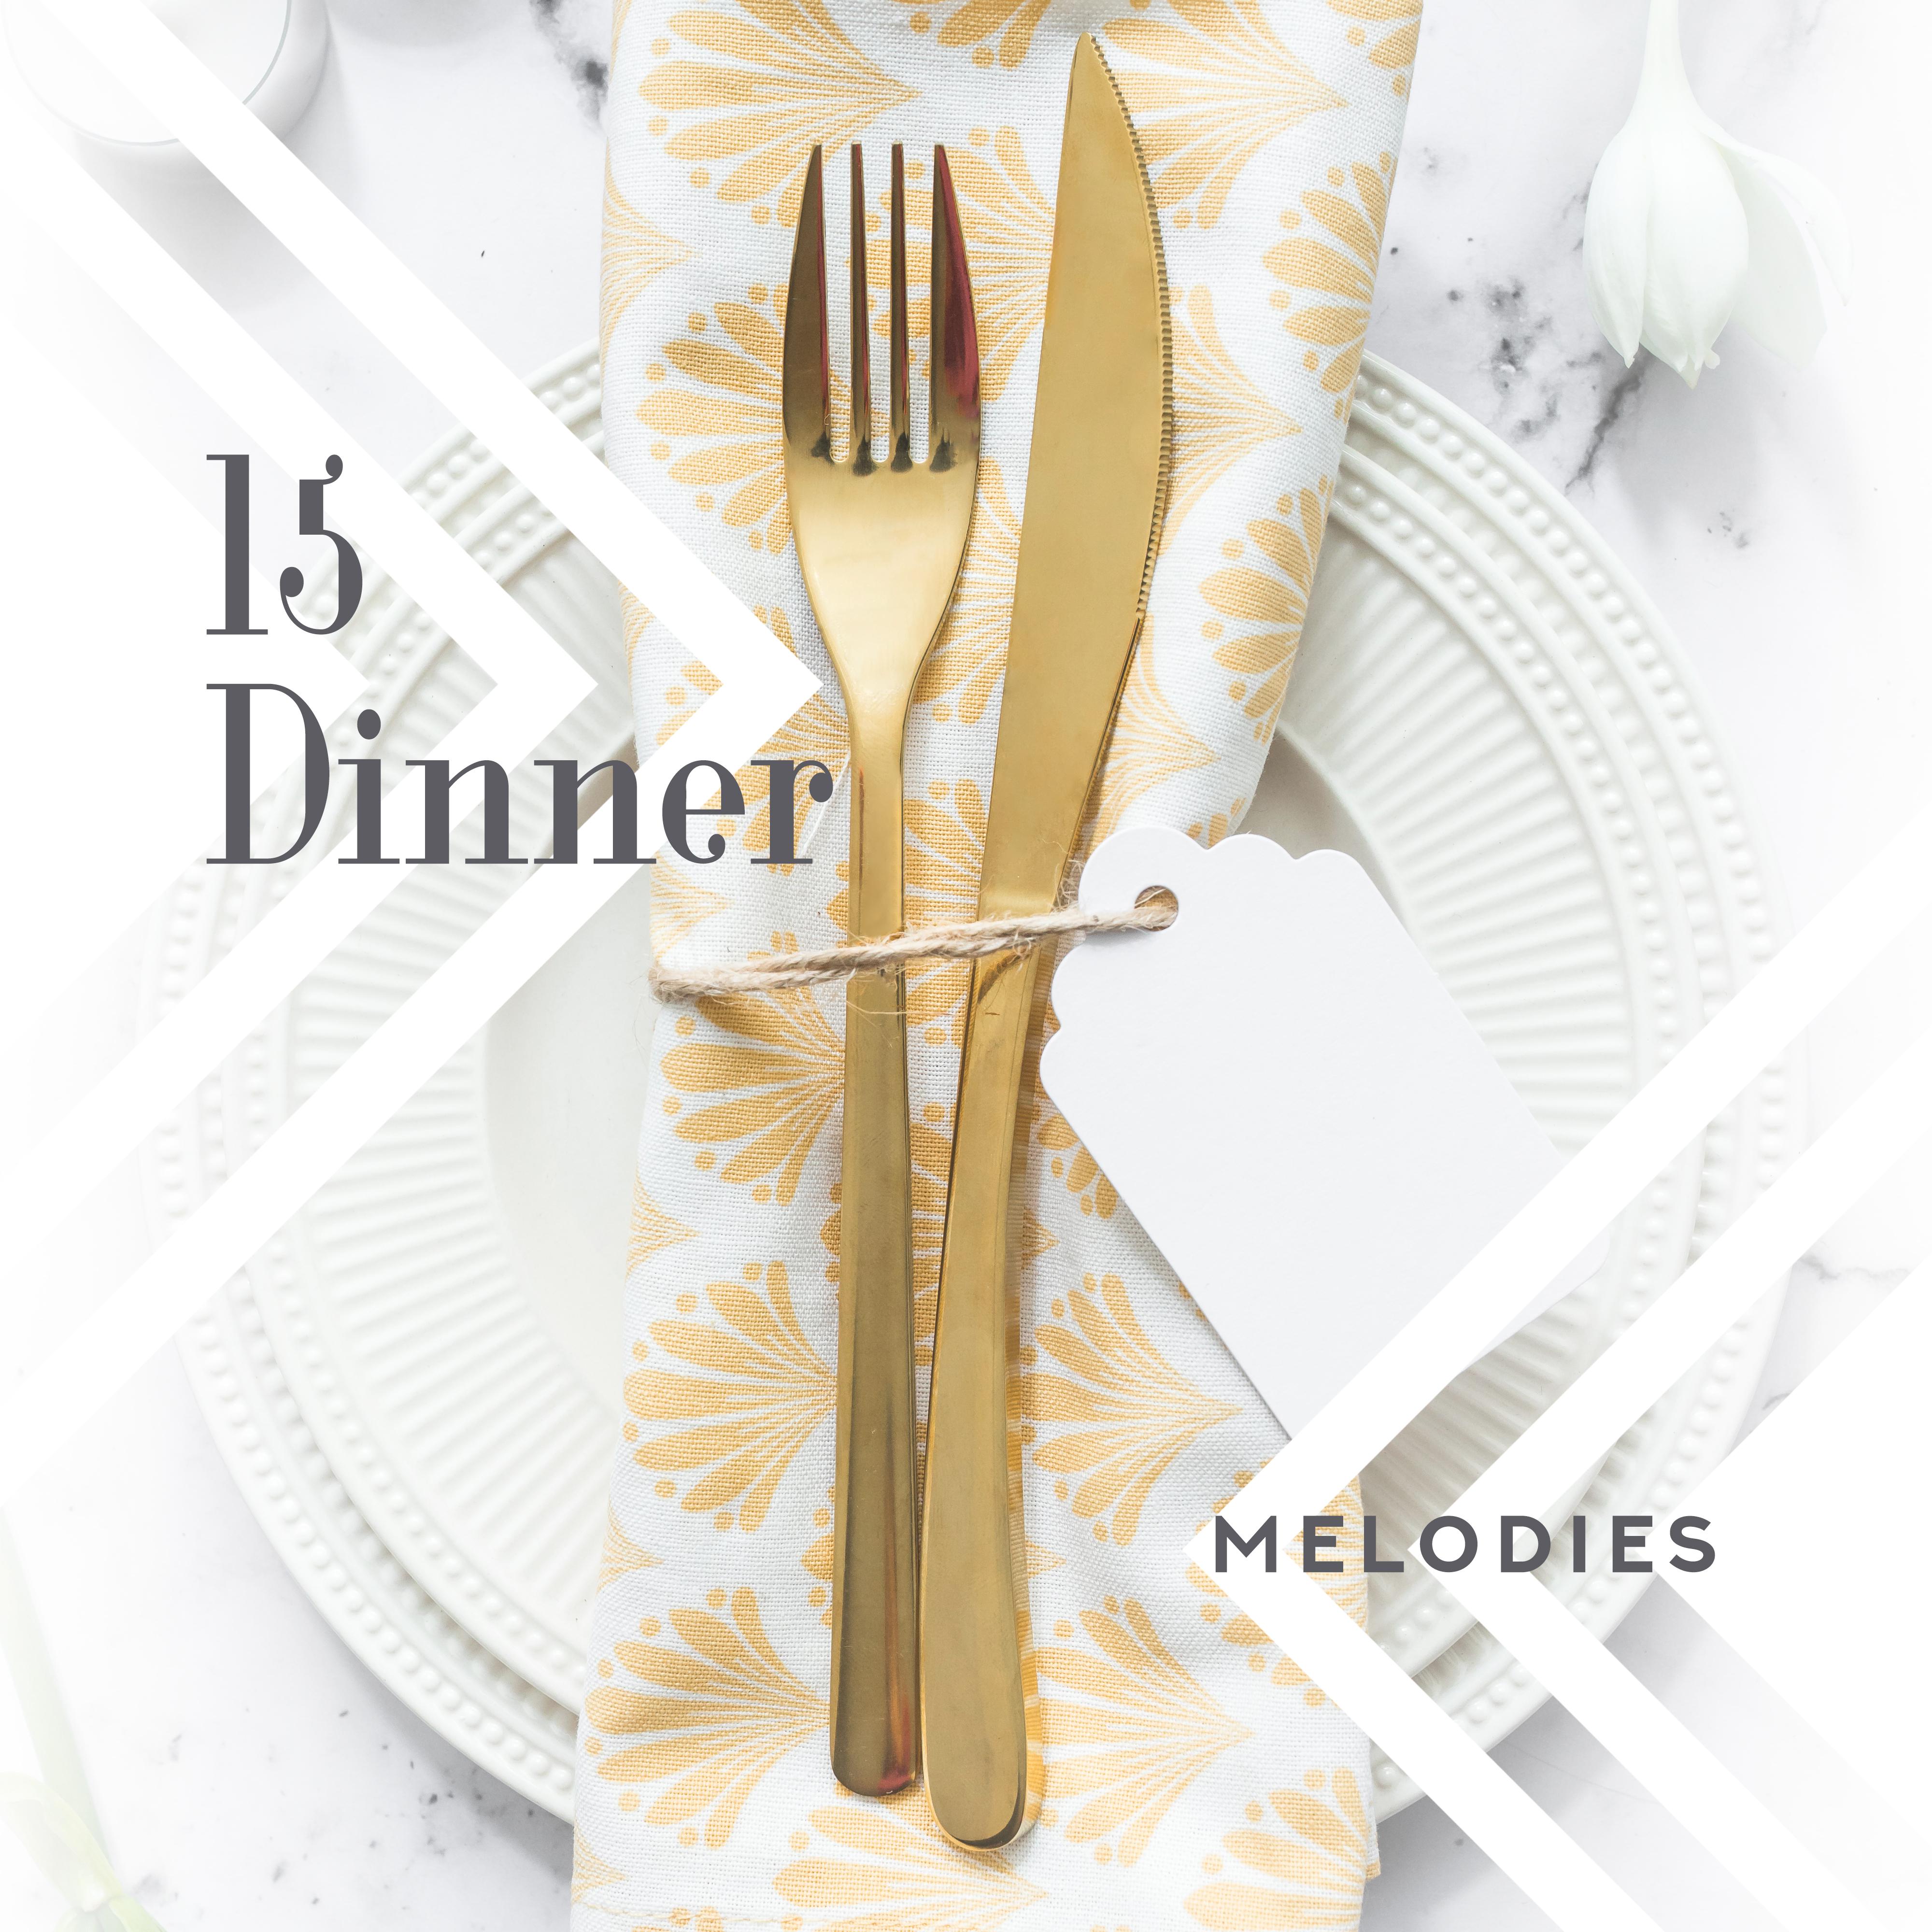 15 Dinner Melodies: Instrumental Jazz for Restaurant, Coffee, Restaurant Songs to Calm Down, Perfect Relax, Jazz Music Ambient